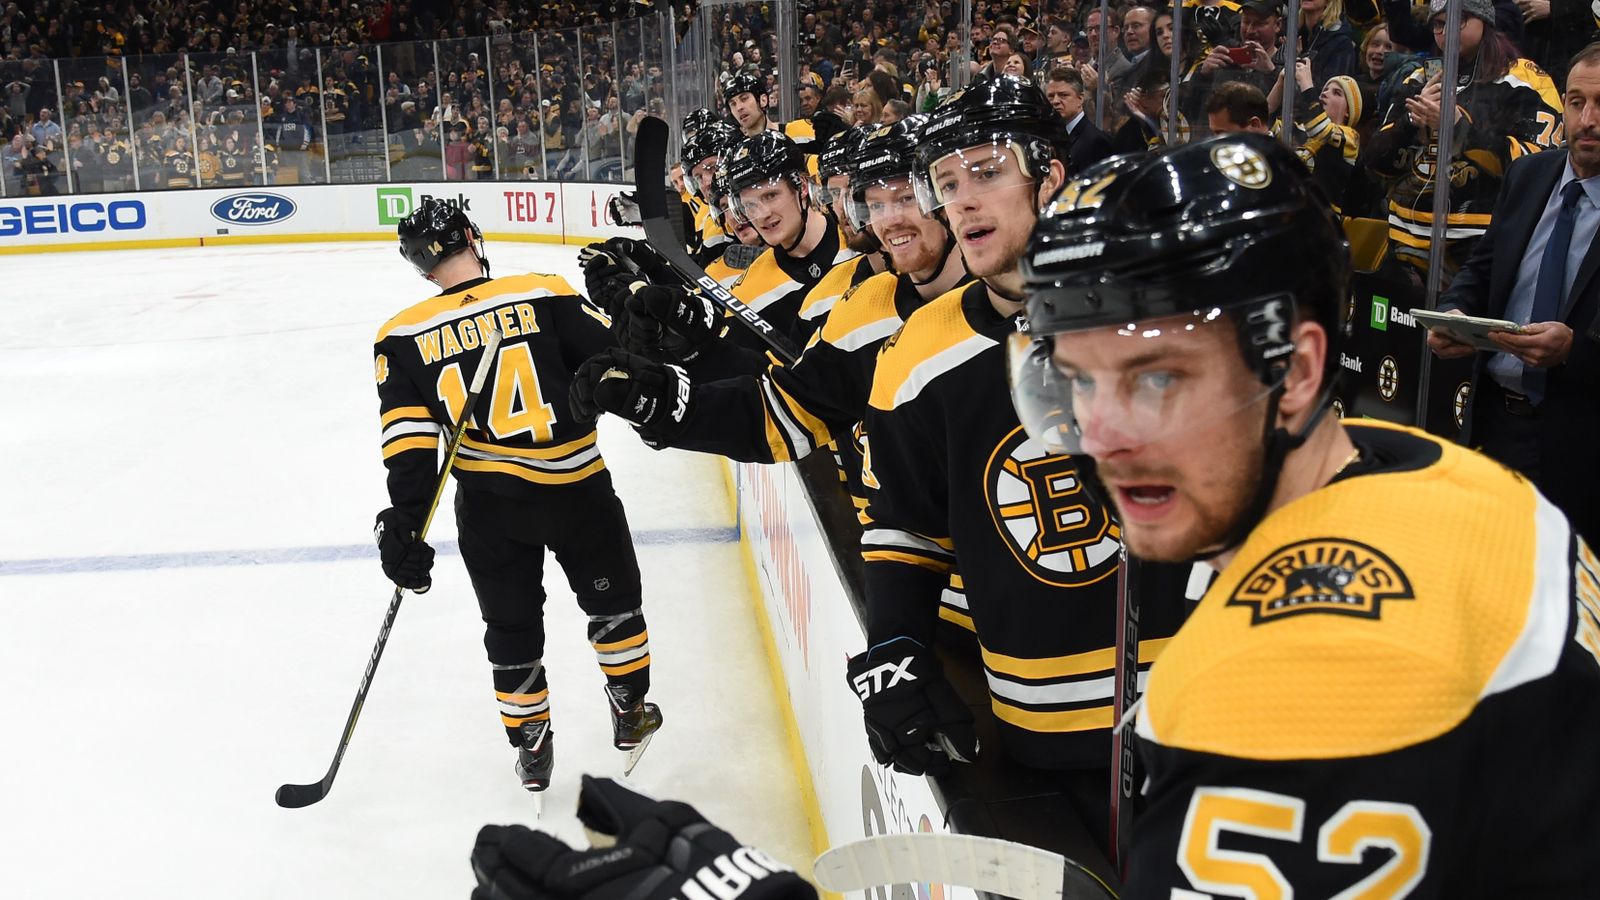 NHL Notebook Sizing up the Bruins’ 7th Player Award candidates